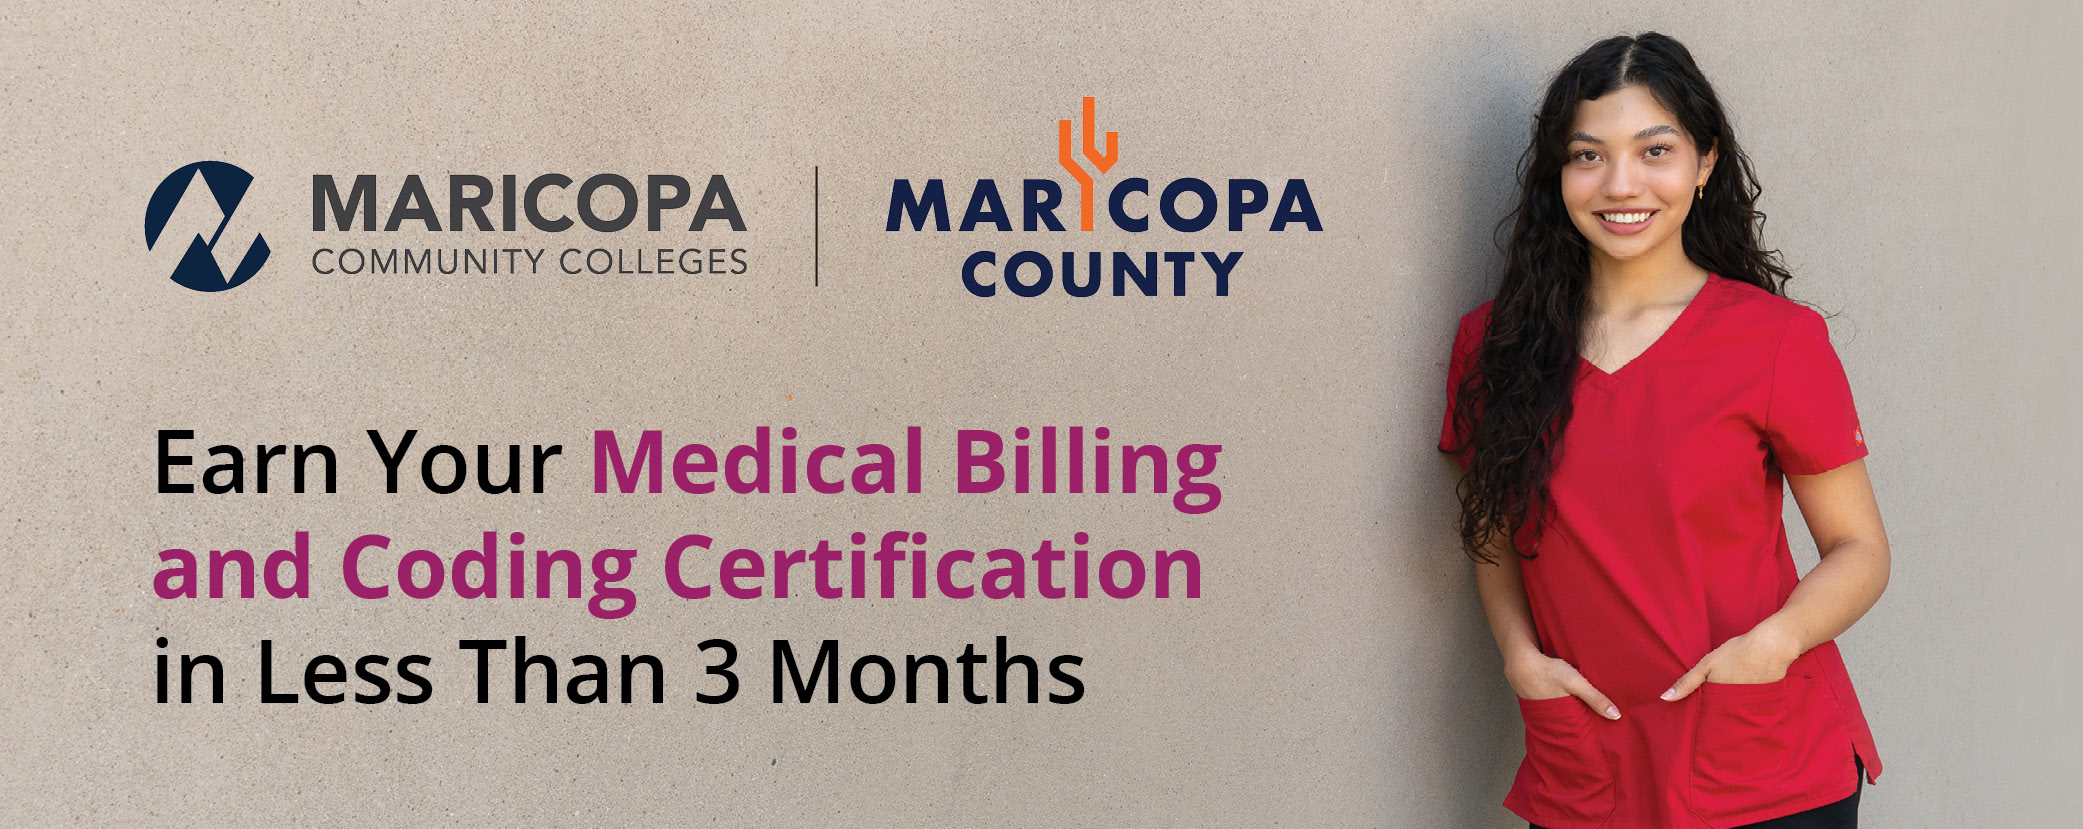 Earn Your Medical Billing and Coding Certification in Less Than 3 Months!